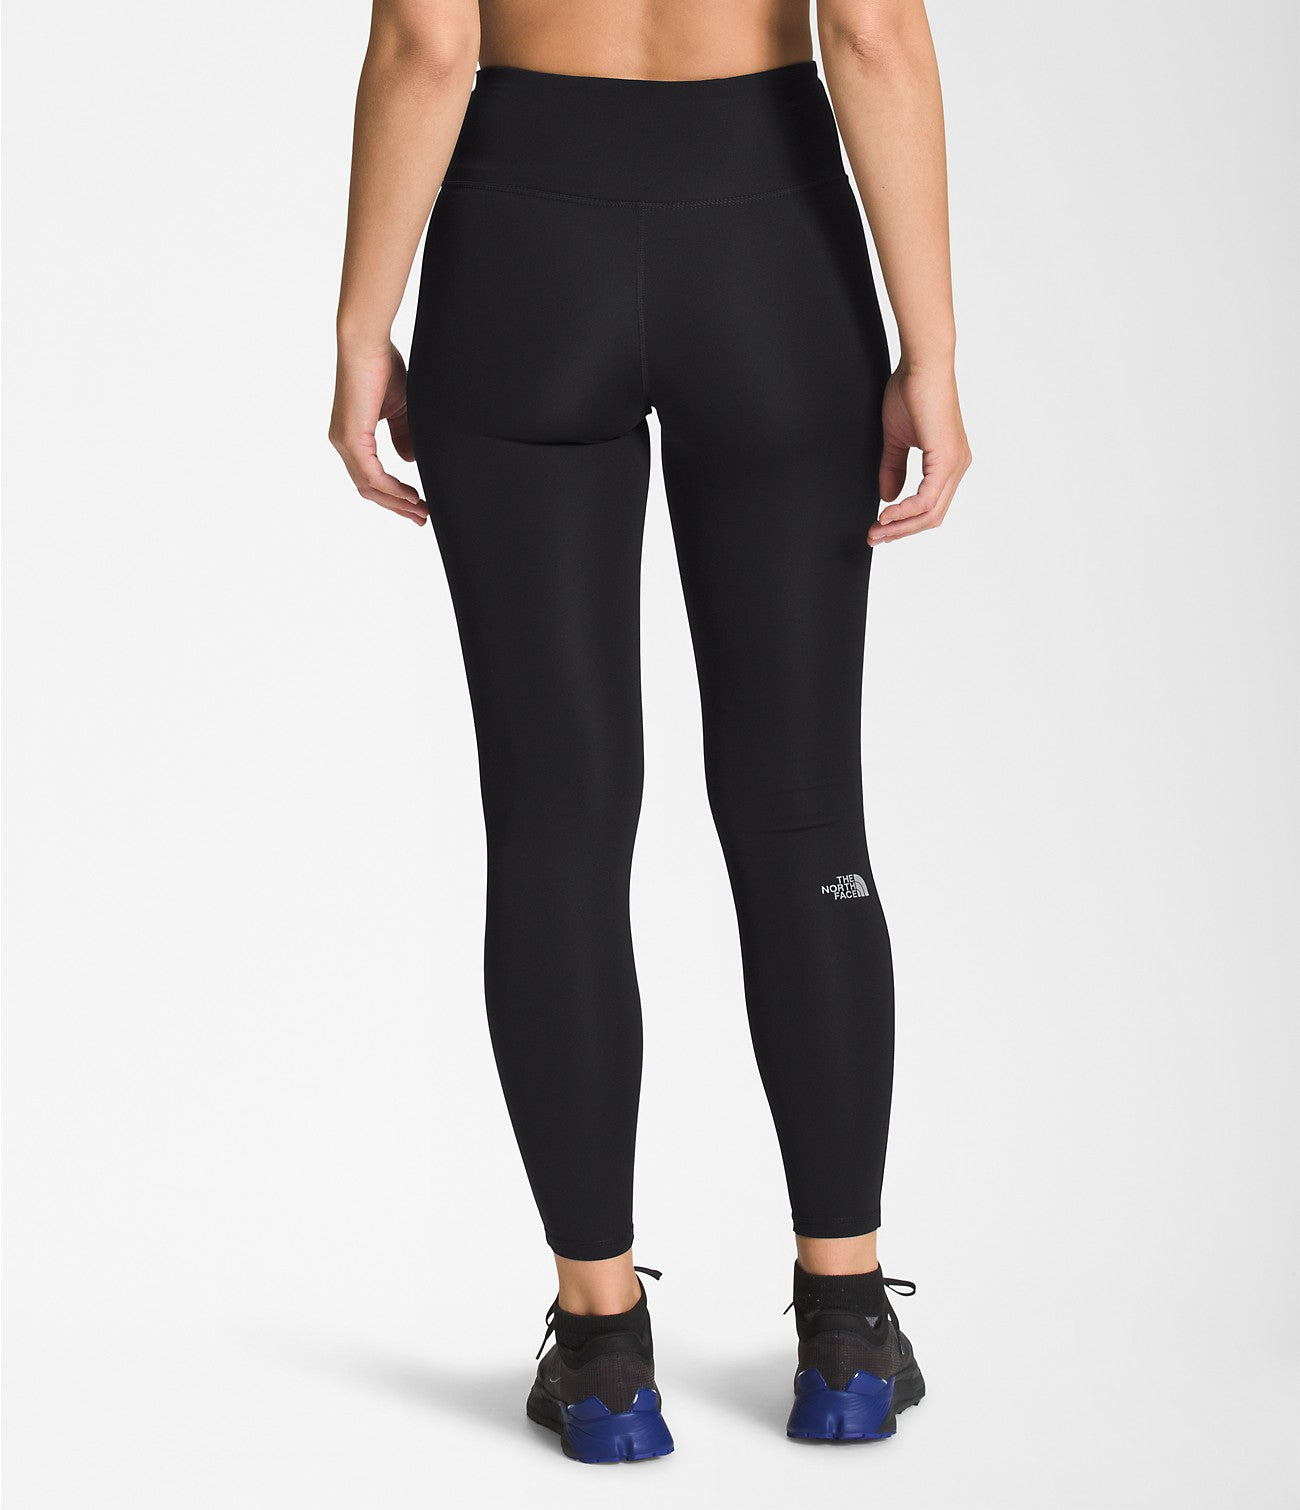 Shop Women's The North Face Tights